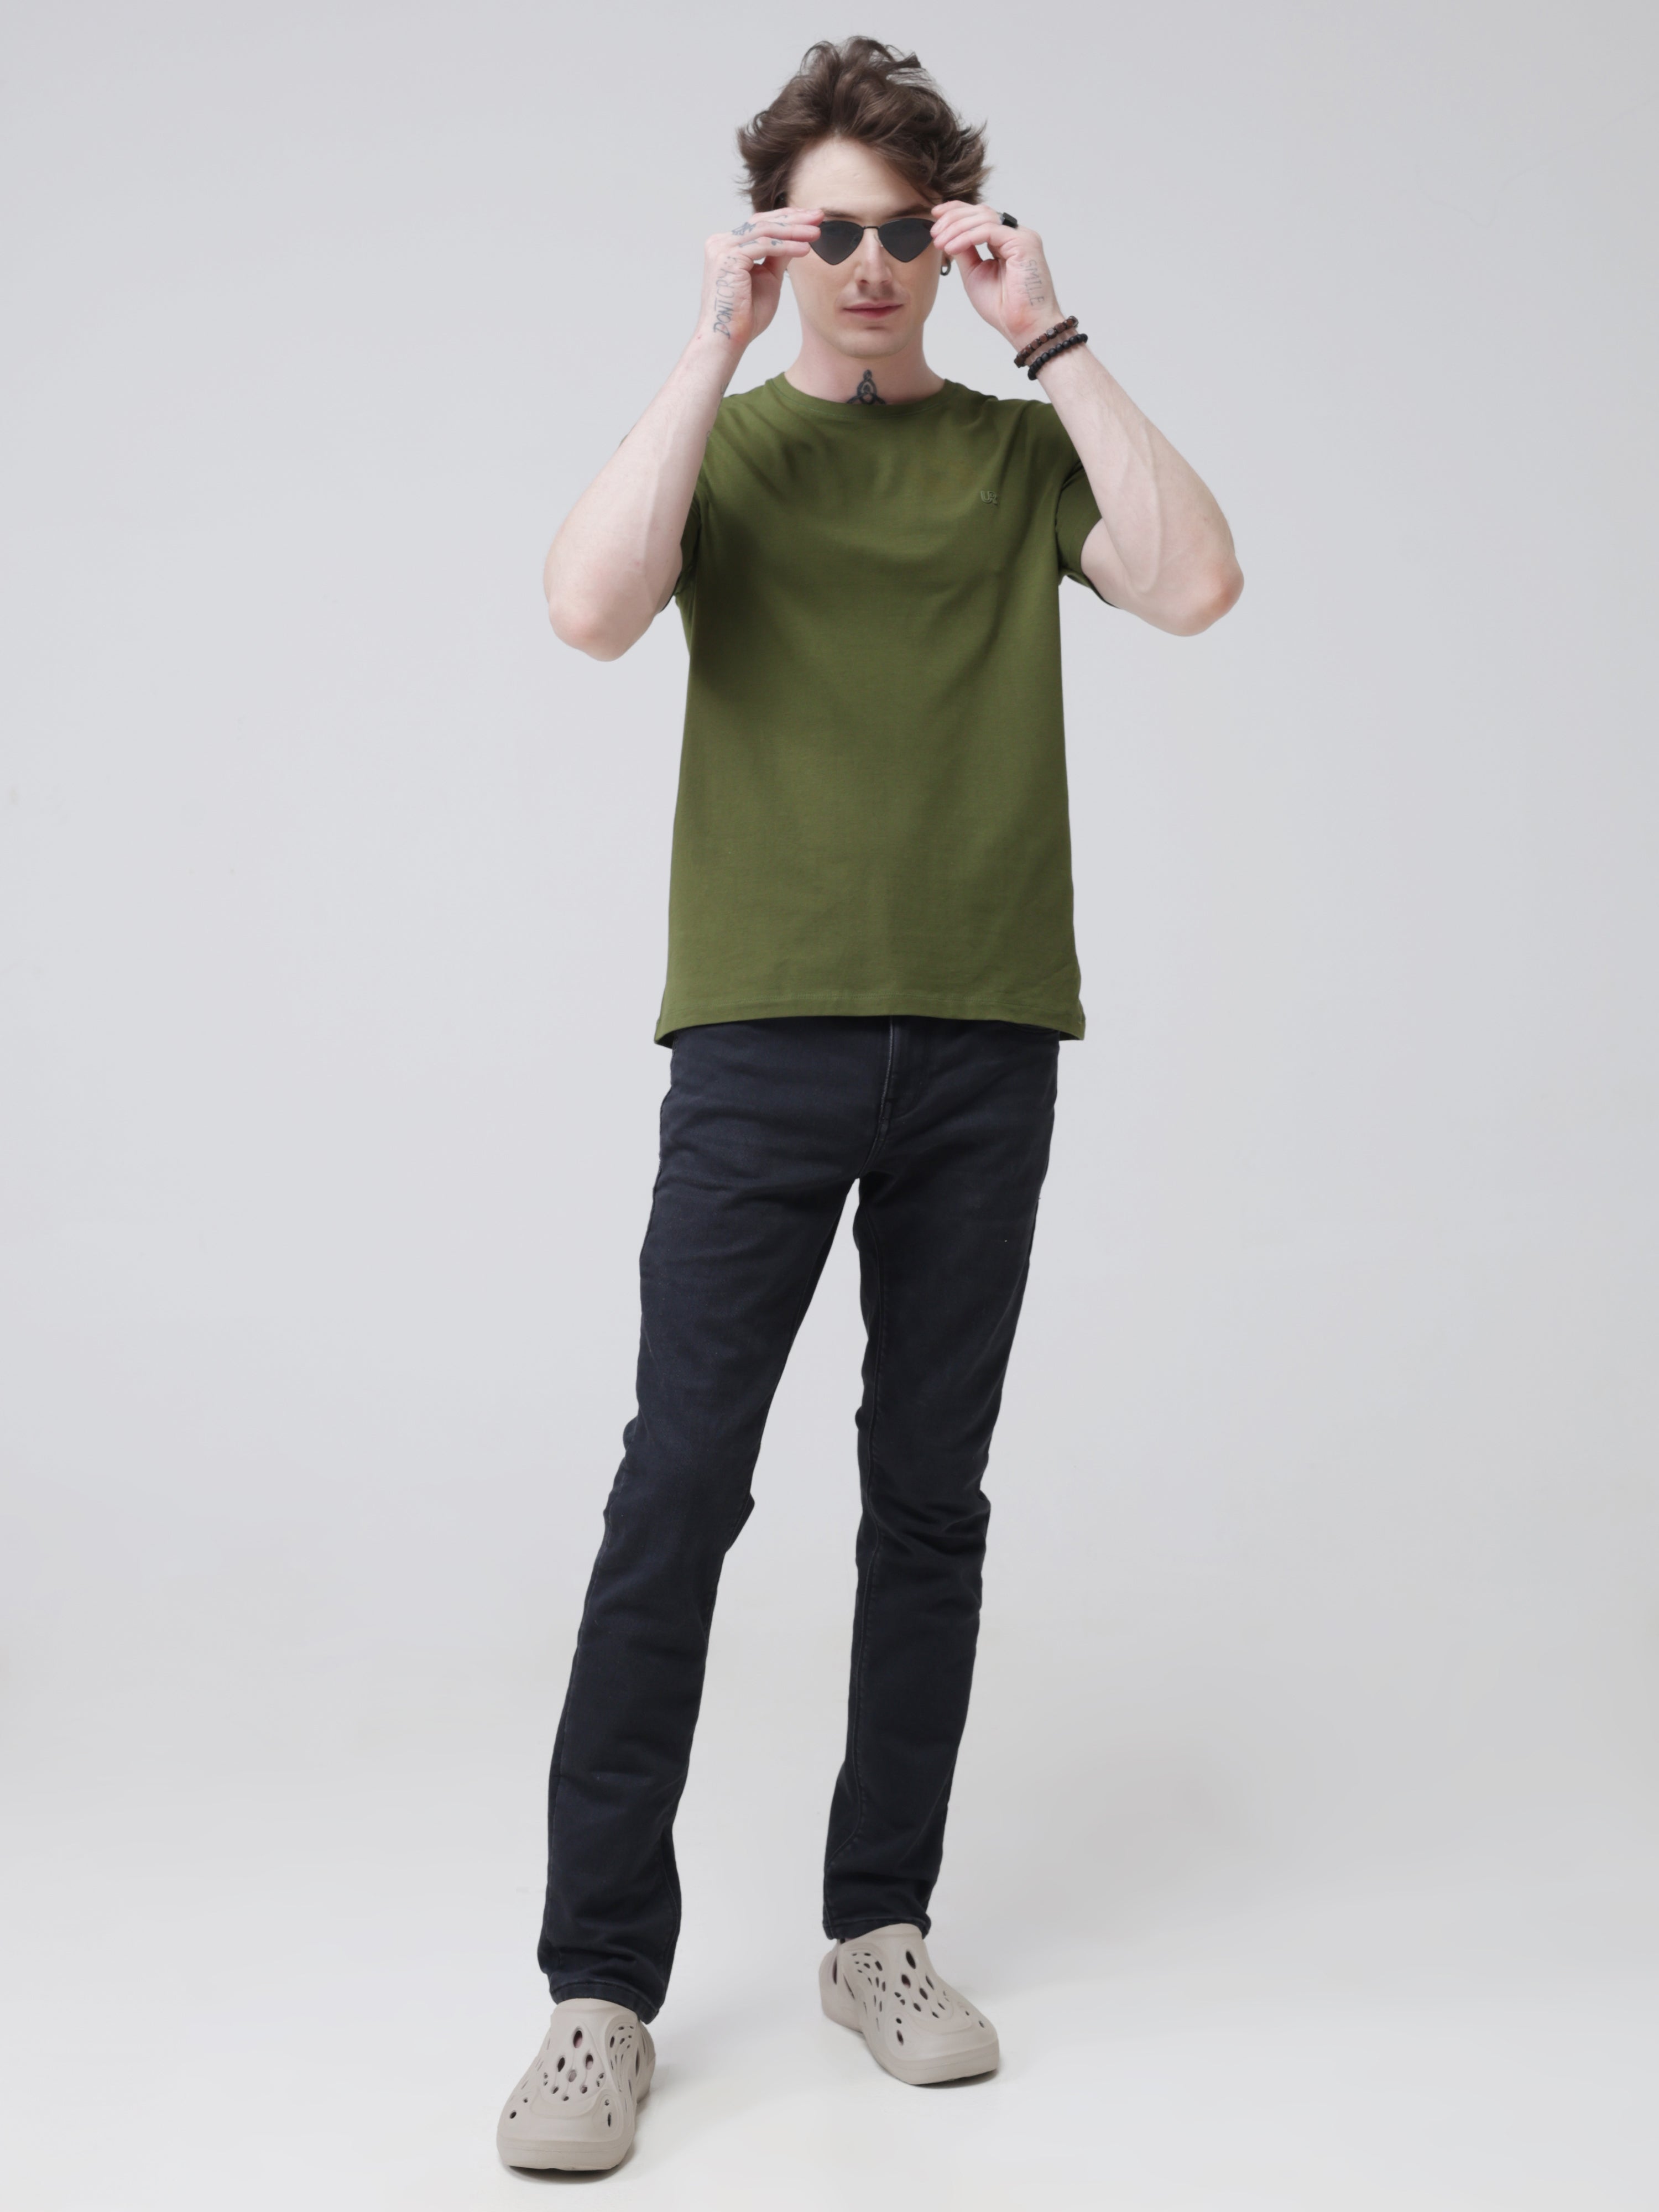 Man wearing a green round-neck Turms T-shirt and dark jeans, showcasing stain-proof, odor-resistant, water-repellent menswear with tailored fit and premium cotton.